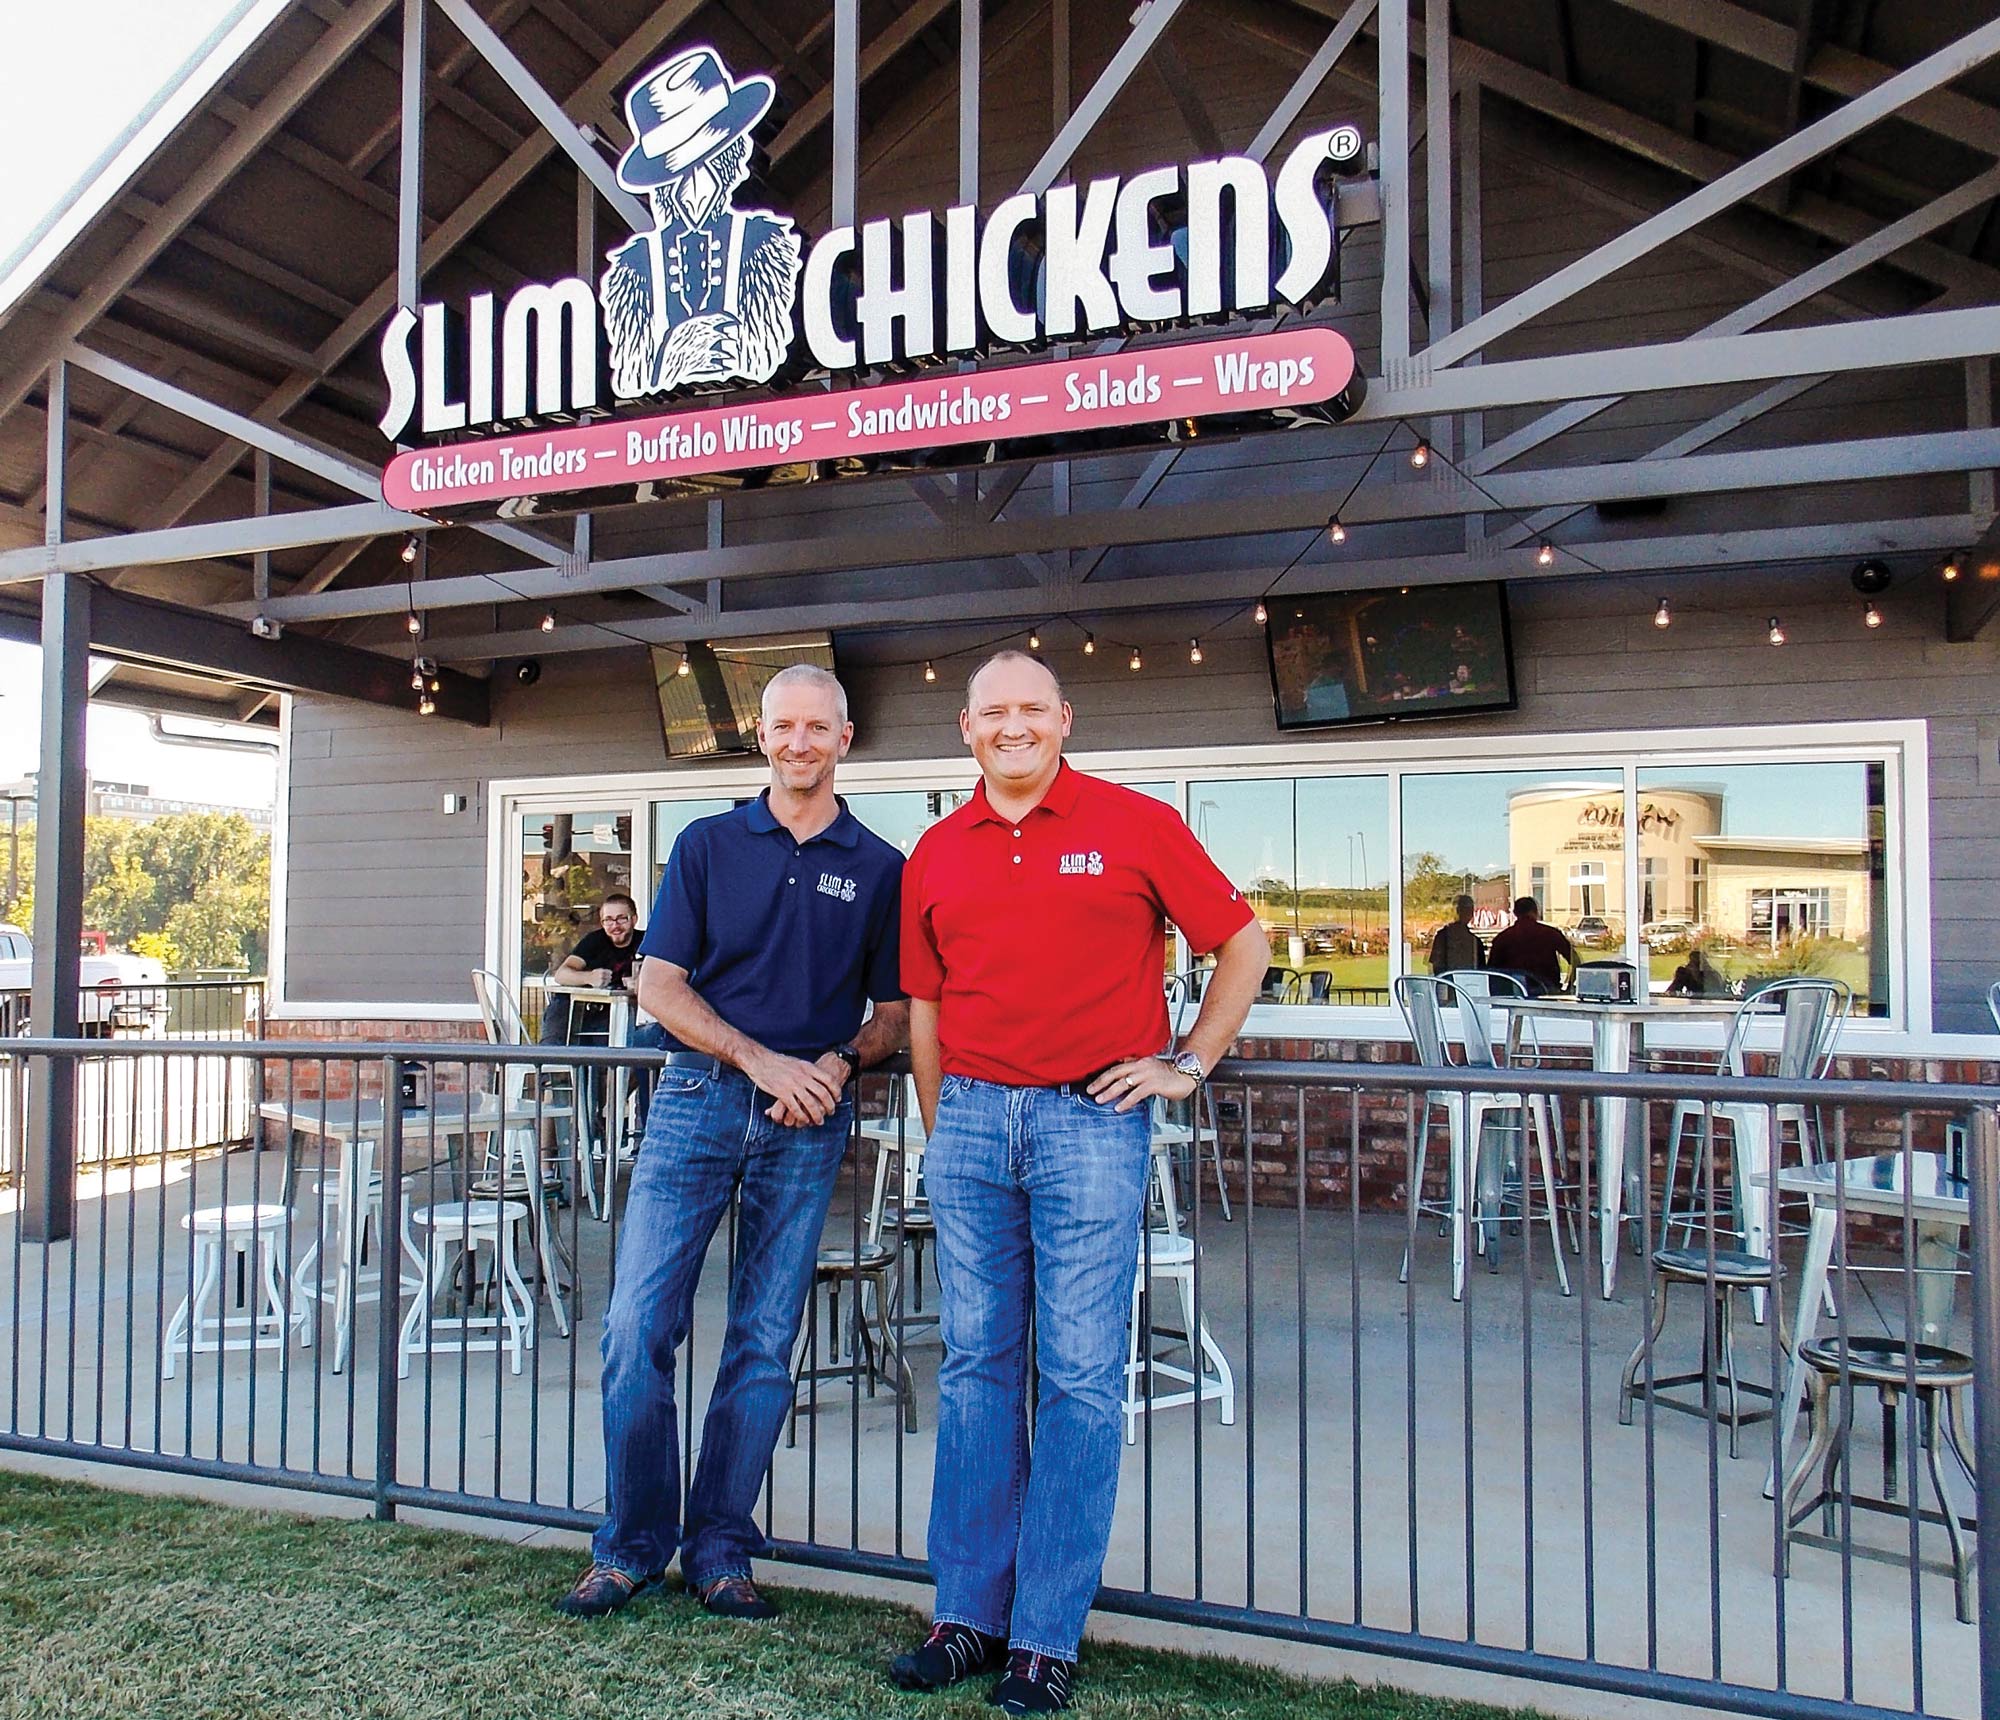 Greg and Tom the founders of Slim chickens